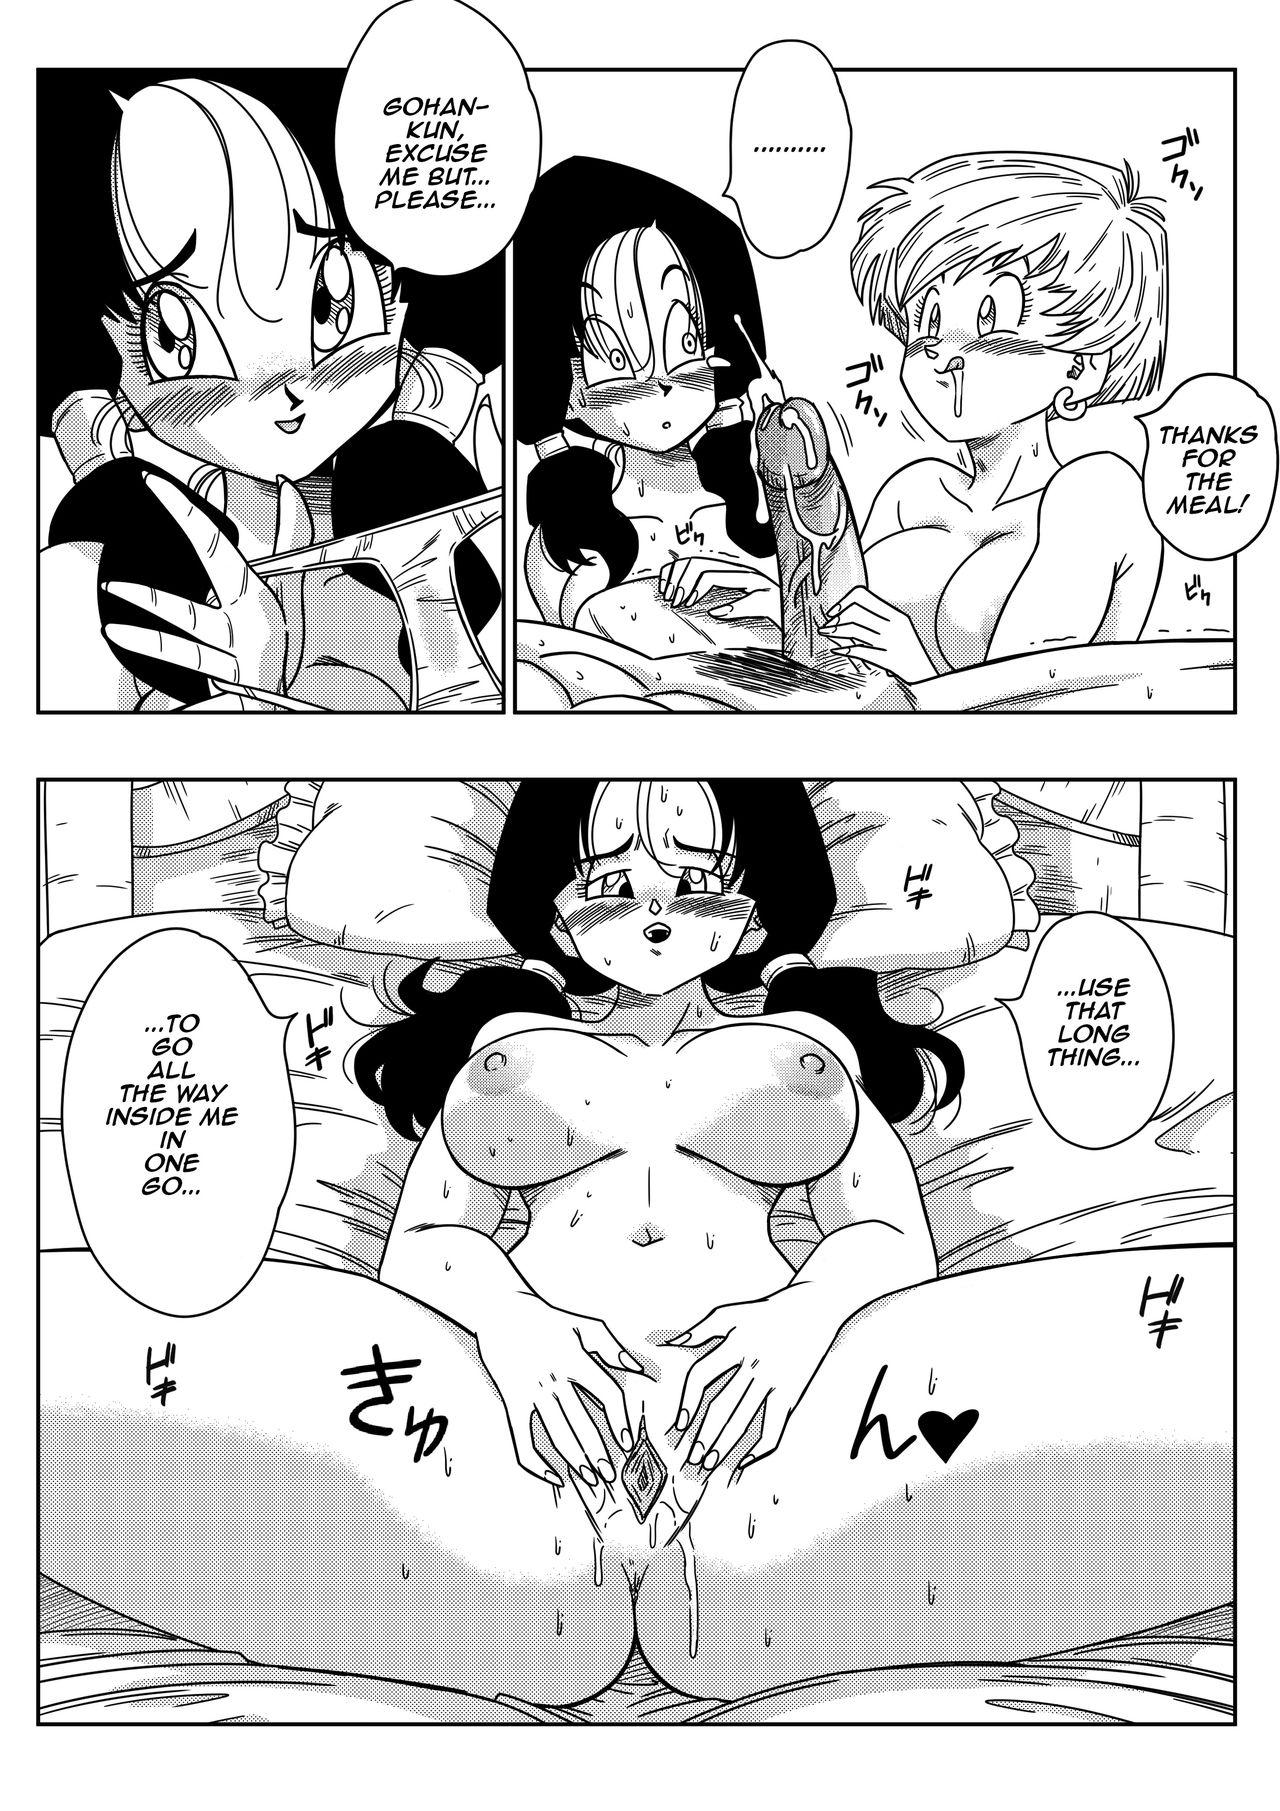 Gay Straight [Yamamoto] LOVE TRIANGLE Z PART 2 - Takusan Ecchi Shichaou! | LOVE TRIANGLE Z PART 2 - Let's Have Lots of Sex! (Dragon Ball Z) [English] [Decensored] - Dragon ball z Best Blowjob - Page 12